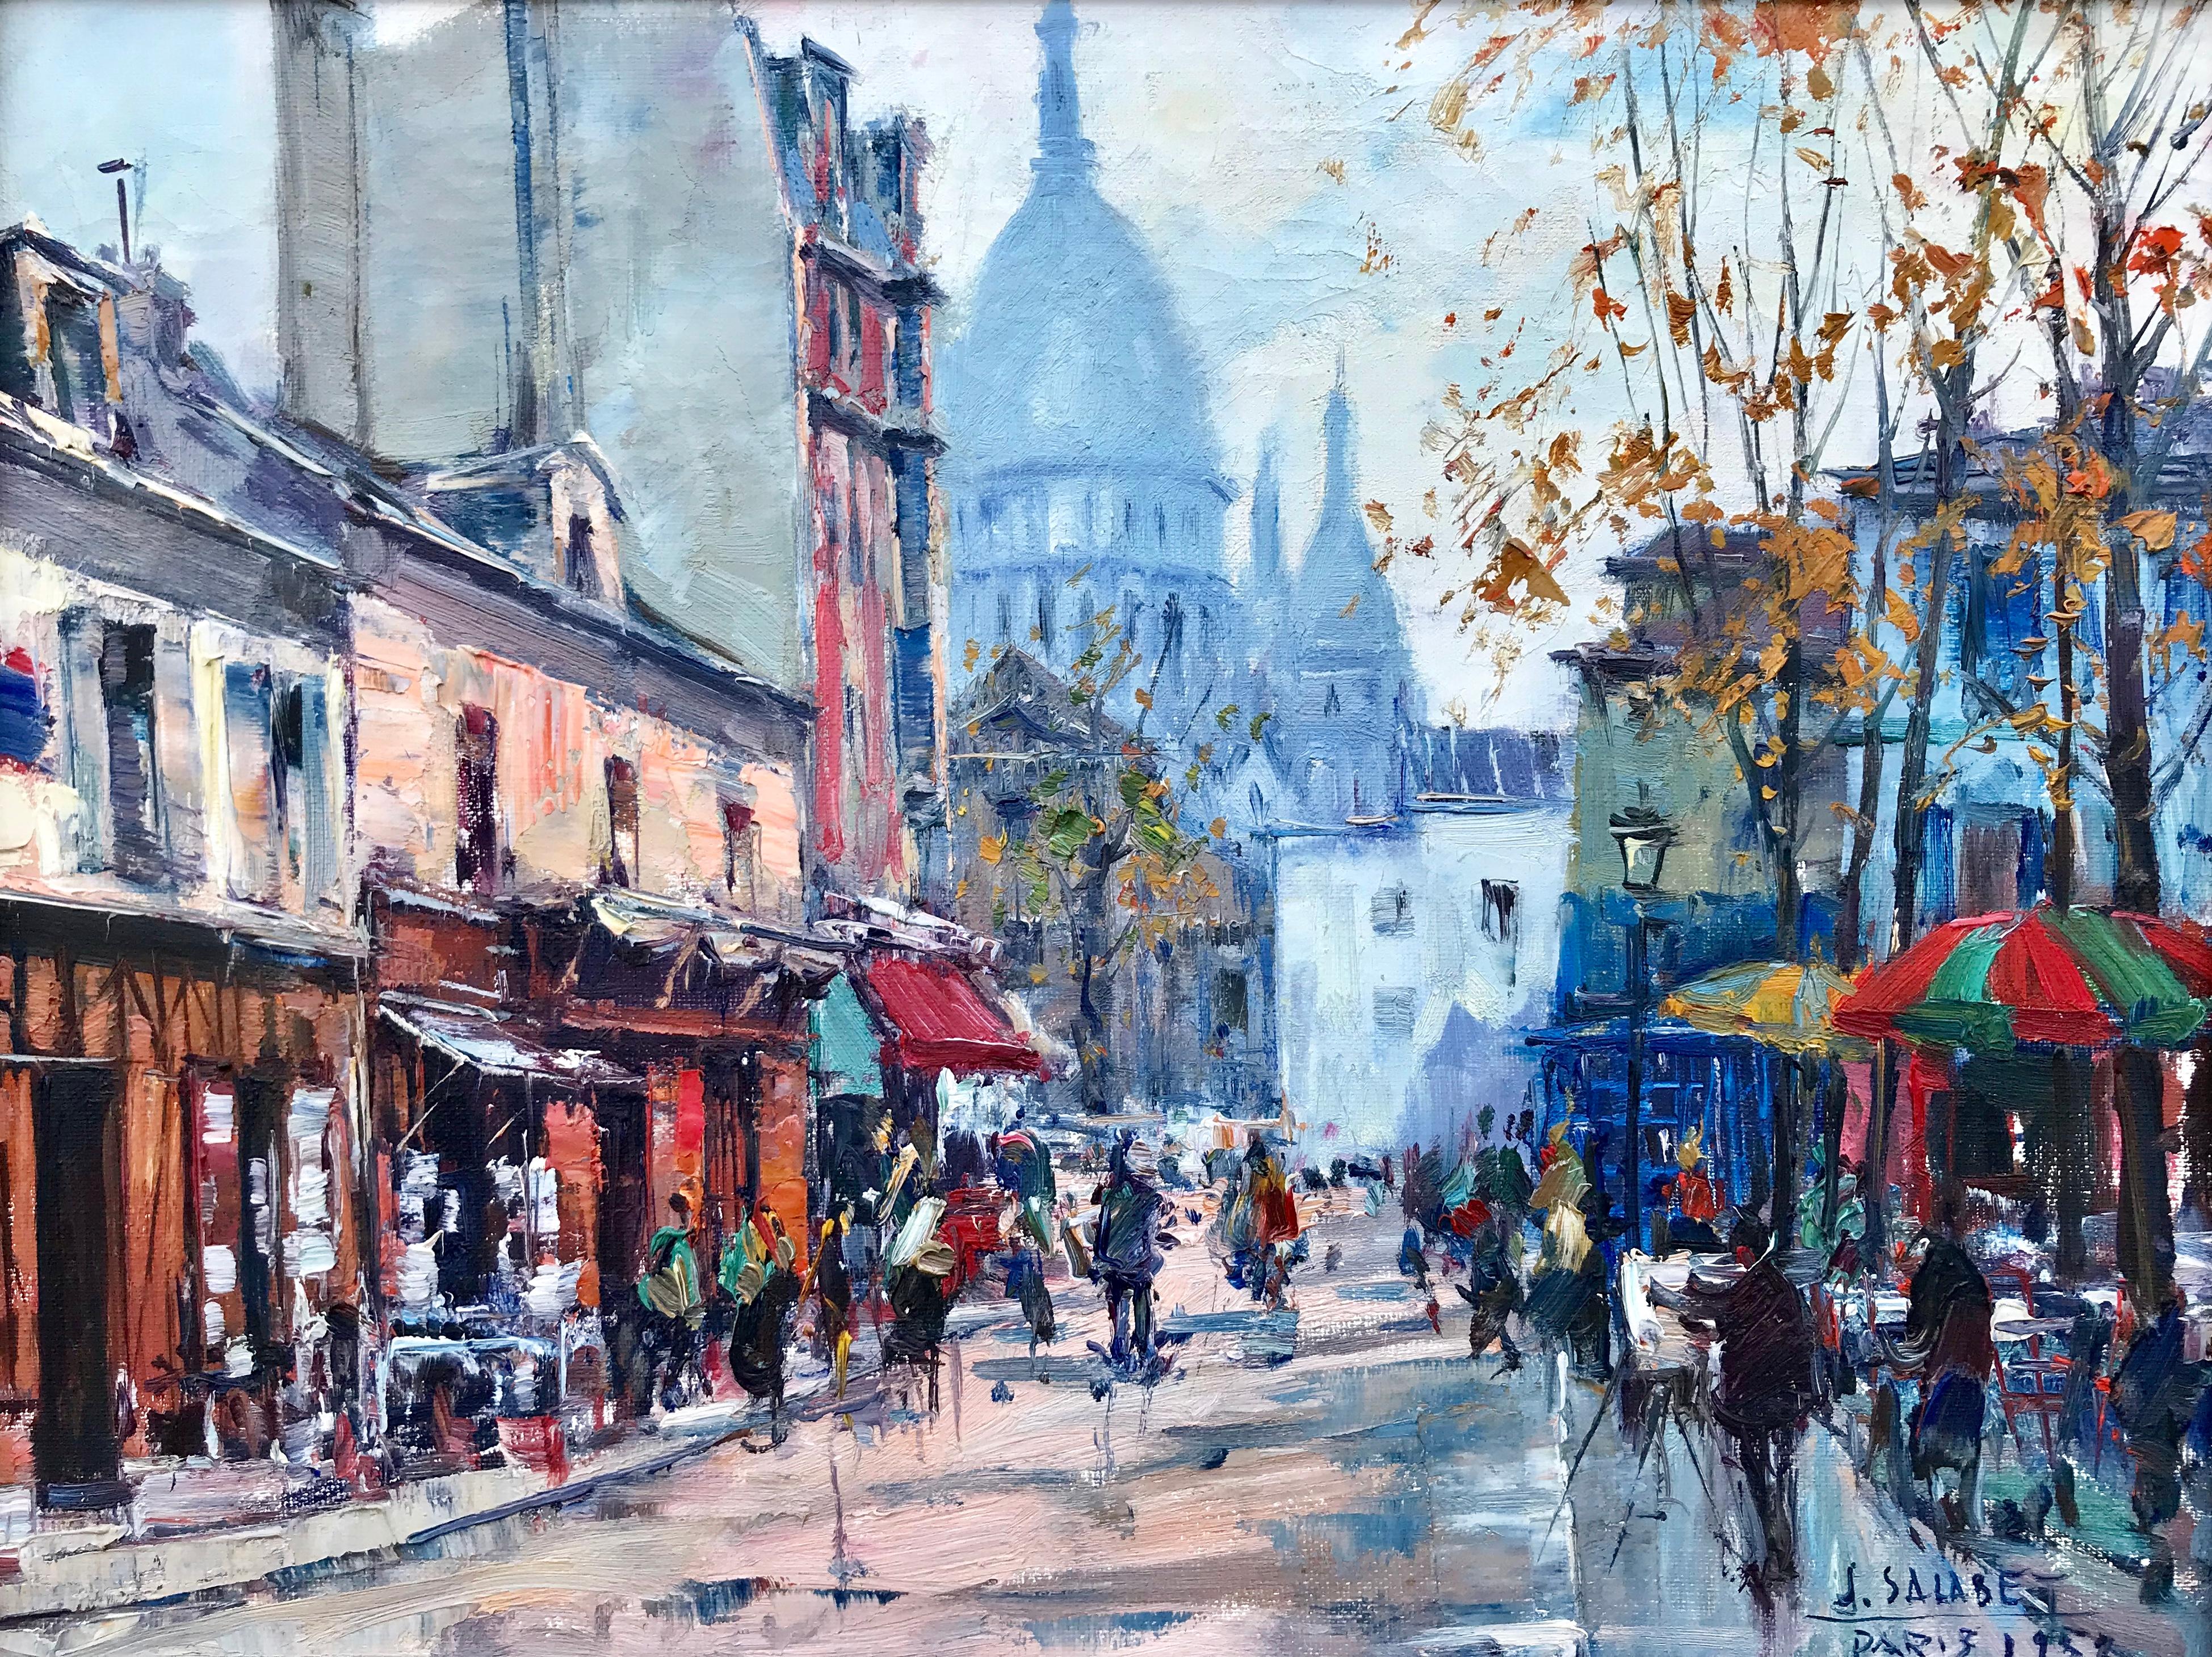 Jean Salabet Figurative Painting - “View of Sacre Coeur”